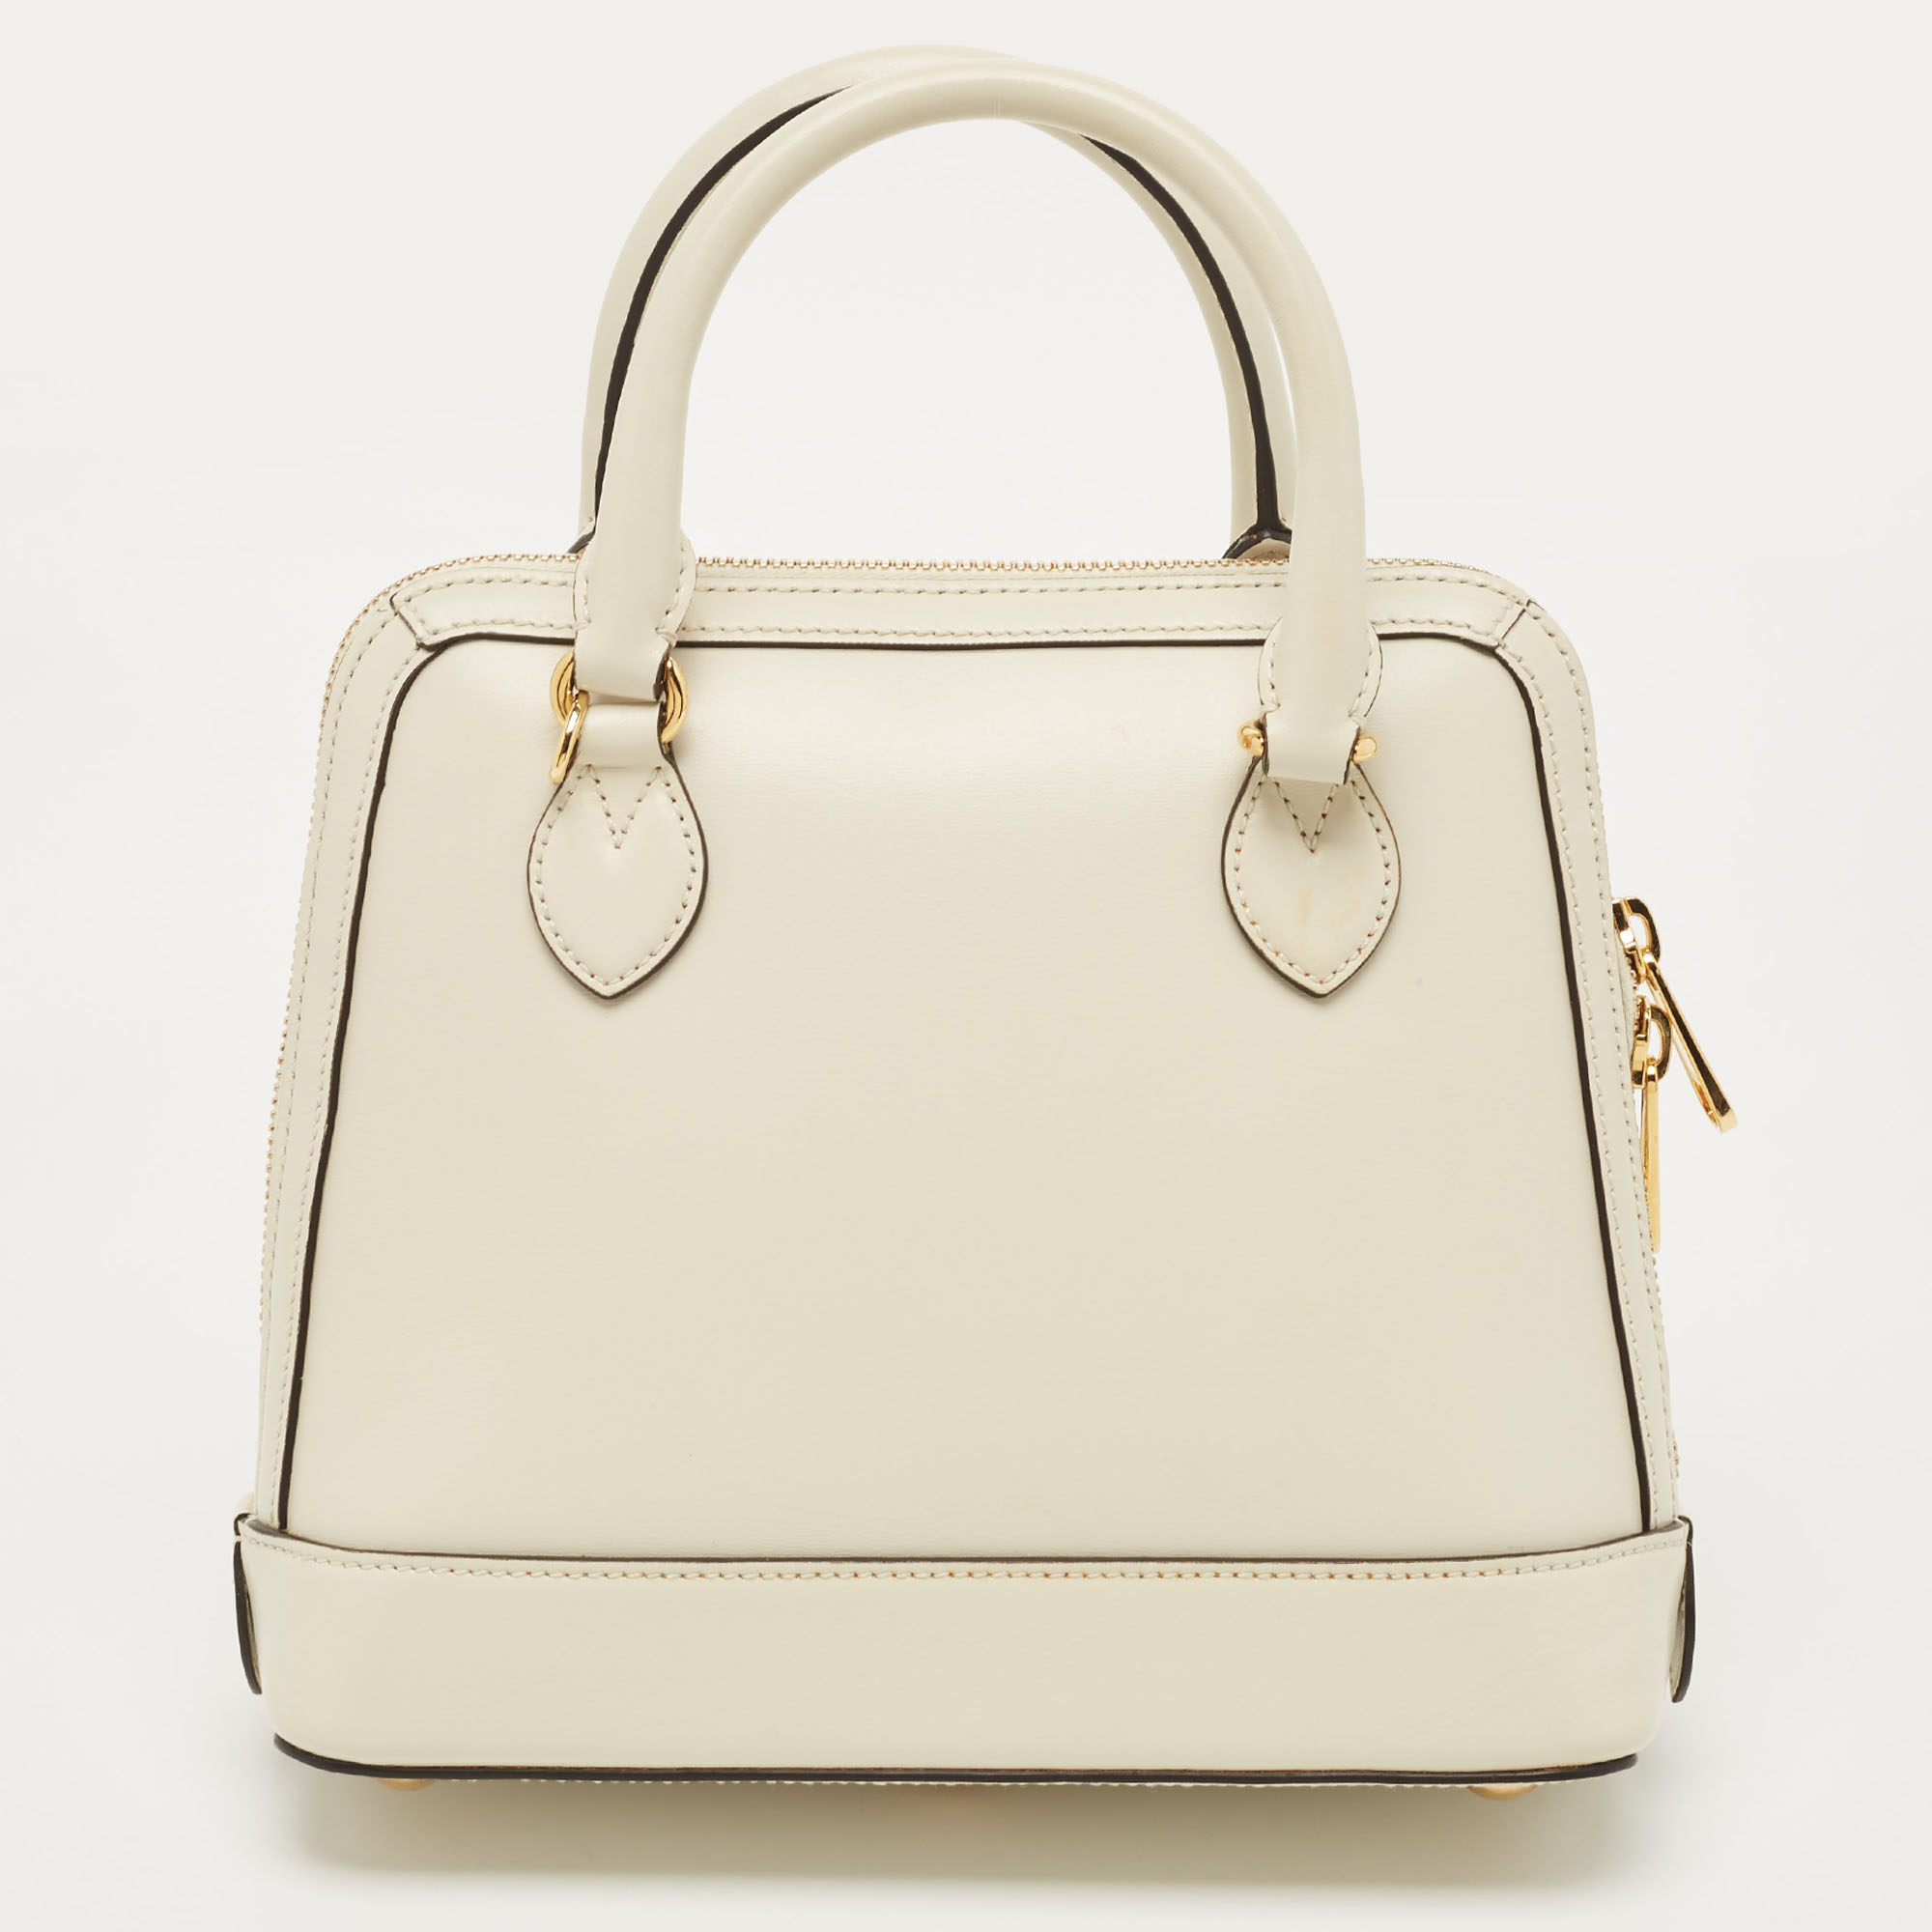 Gucci Off White Leather Small Horsebit 1955 Satchel